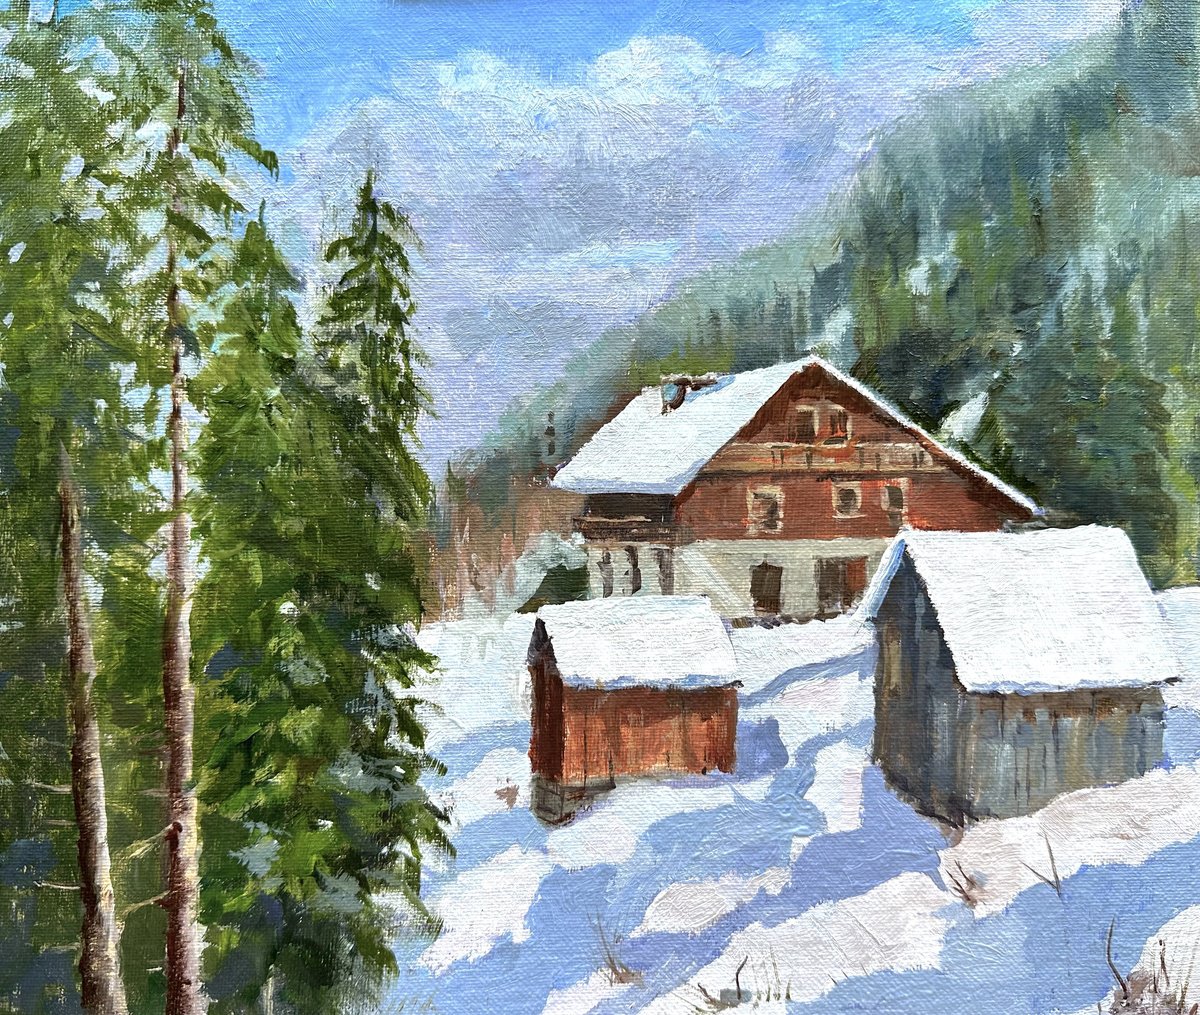 Chalet in snow by Toni Swiffen